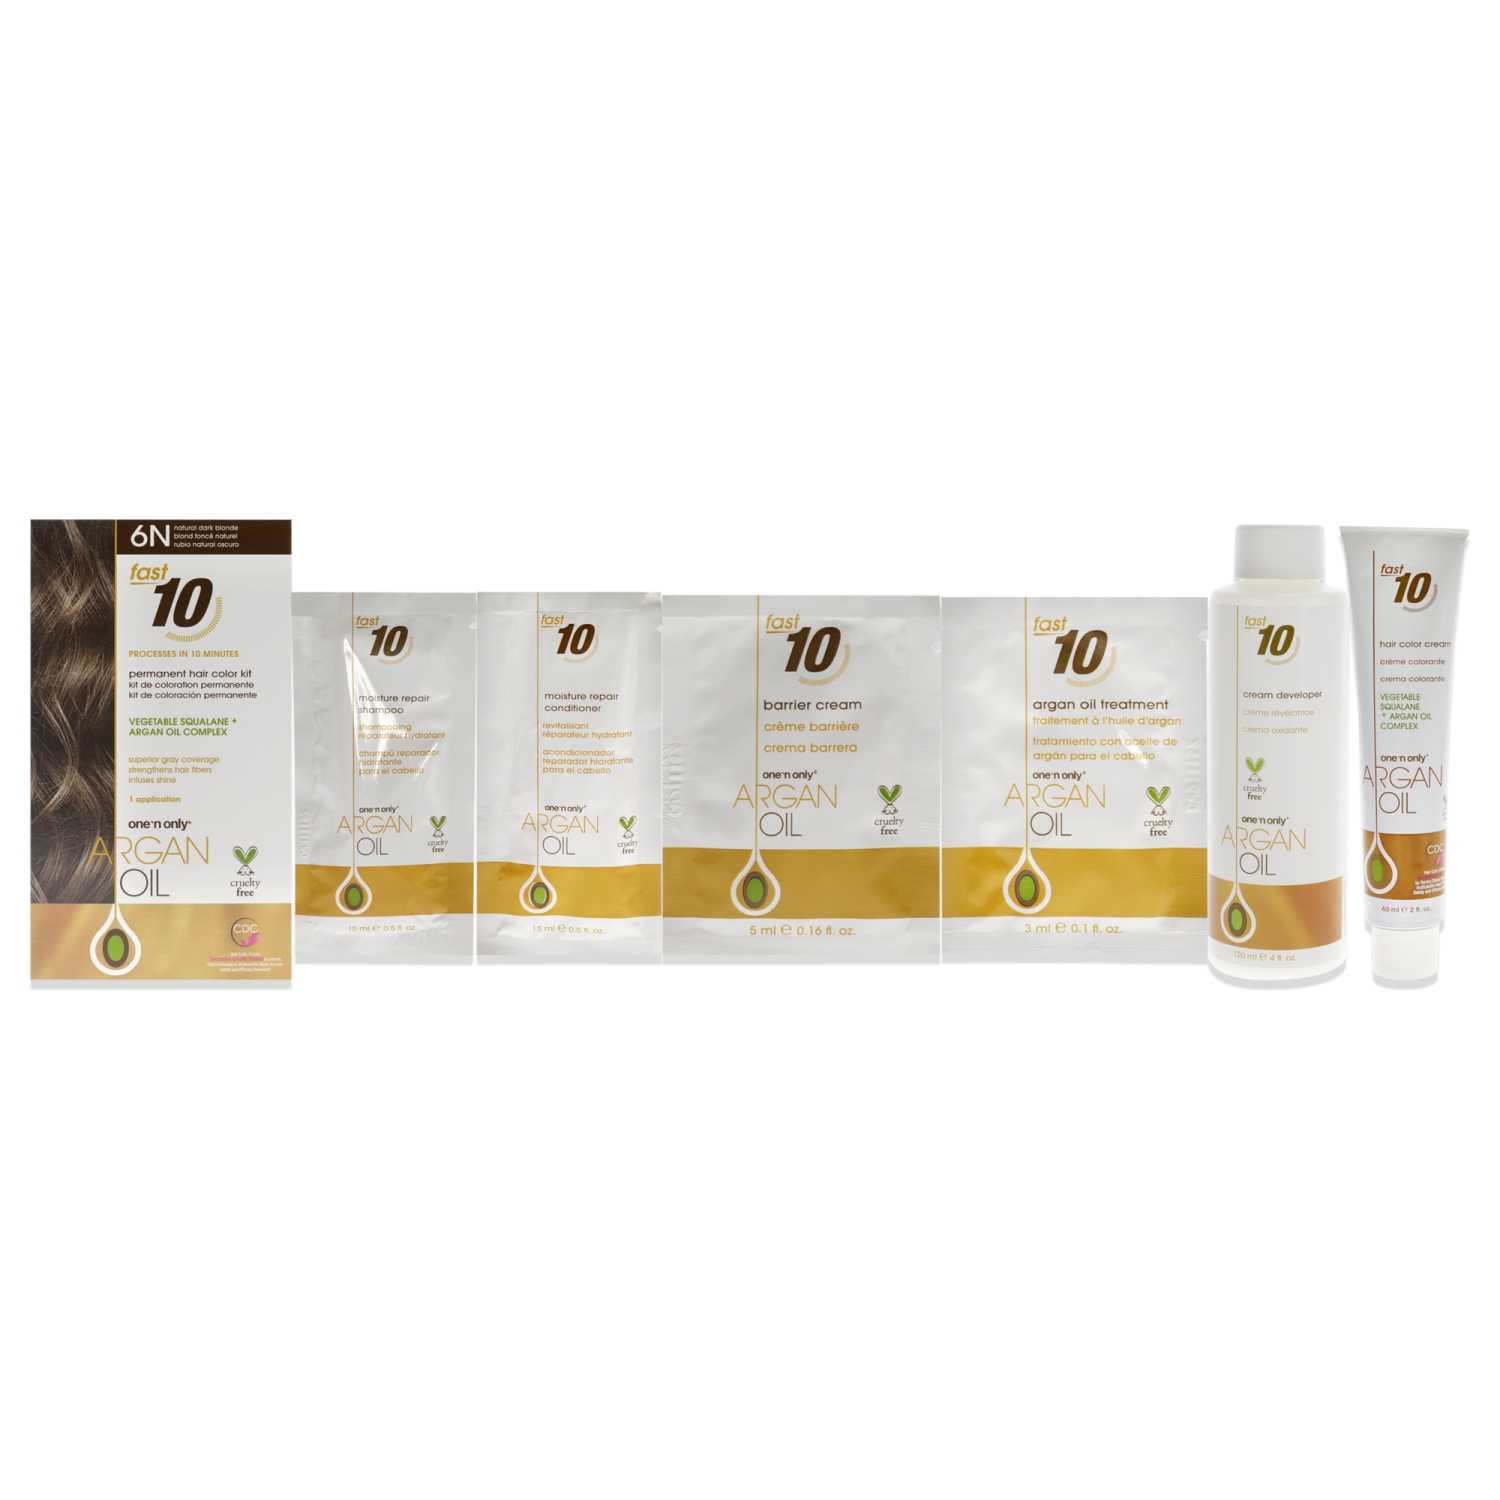 Argan Oil Fast 10 Permanent Hair Color Kit - 6N Natural Dark Blonde by One n Only for Unisex - 1 Pc Hair Color